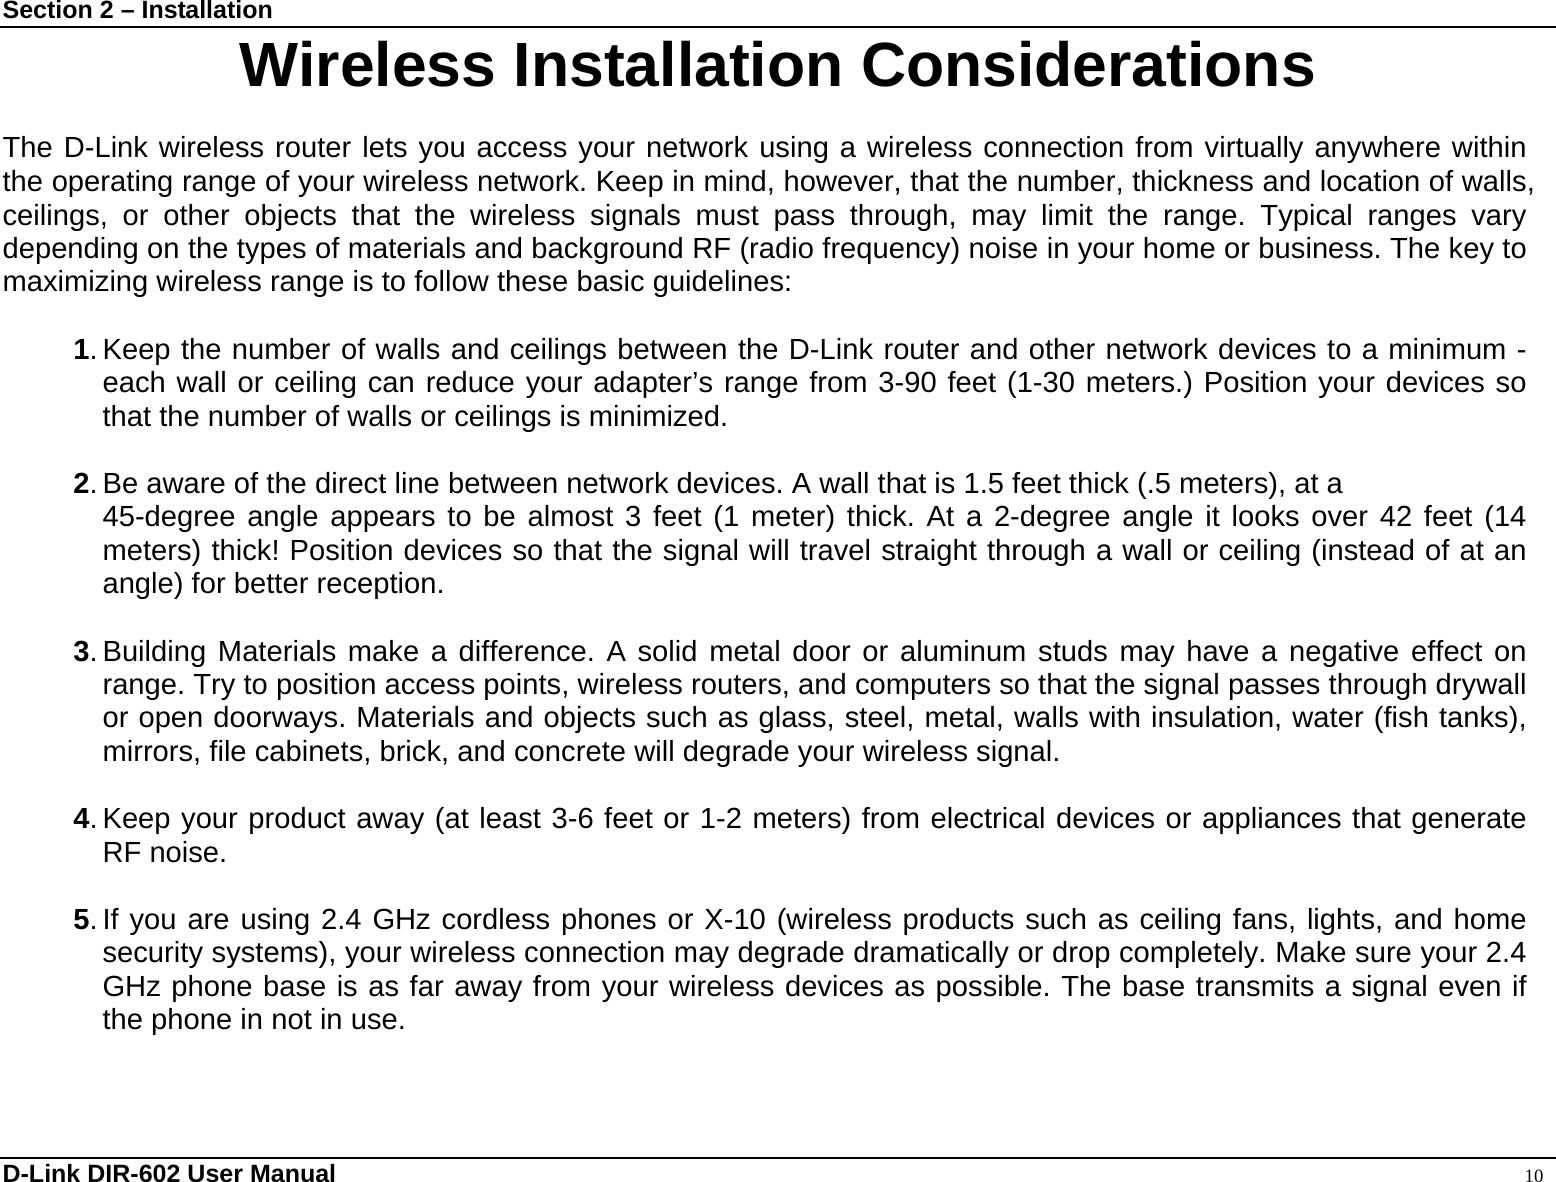 Section 2 – Installation  D-Link DIR-602 User Manual                                                                                               10 Wireless Installation Considerations  The D-Link wireless router lets you access your network using a wireless connection from virtually anywhere within the operating range of your wireless network. Keep in mind, however, that the number, thickness and location of walls, ceilings, or other objects that the wireless signals must pass through, may limit the range. Typical ranges vary depending on the types of materials and background RF (radio frequency) noise in your home or business. The key to maximizing wireless range is to follow these basic guidelines:  1. Keep the number of walls and ceilings between the D-Link router and other network devices to a minimum - each wall or ceiling can reduce your adapter’s range from 3-90 feet (1-30 meters.) Position your devices so that the number of walls or ceilings is minimized.  2. Be aware of the direct line between network devices. A wall that is 1.5 feet thick (.5 meters), at a   45-degree angle appears to be almost 3 feet (1 meter) thick. At a 2-degree angle it looks over 42 feet (14 meters) thick! Position devices so that the signal will travel straight through a wall or ceiling (instead of at an angle) for better reception.  3. Building Materials make a difference. A solid metal door or aluminum studs may have a negative effect on range. Try to position access points, wireless routers, and computers so that the signal passes through drywall or open doorways. Materials and objects such as glass, steel, metal, walls with insulation, water (fish tanks), mirrors, file cabinets, brick, and concrete will degrade your wireless signal.  4. Keep your product away (at least 3-6 feet or 1-2 meters) from electrical devices or appliances that generate RF noise.  5. If you are using 2.4 GHz cordless phones or X-10 (wireless products such as ceiling fans, lights, and home security systems), your wireless connection may degrade dramatically or drop completely. Make sure your 2.4 GHz phone base is as far away from your wireless devices as possible. The base transmits a signal even if the phone in not in use. 